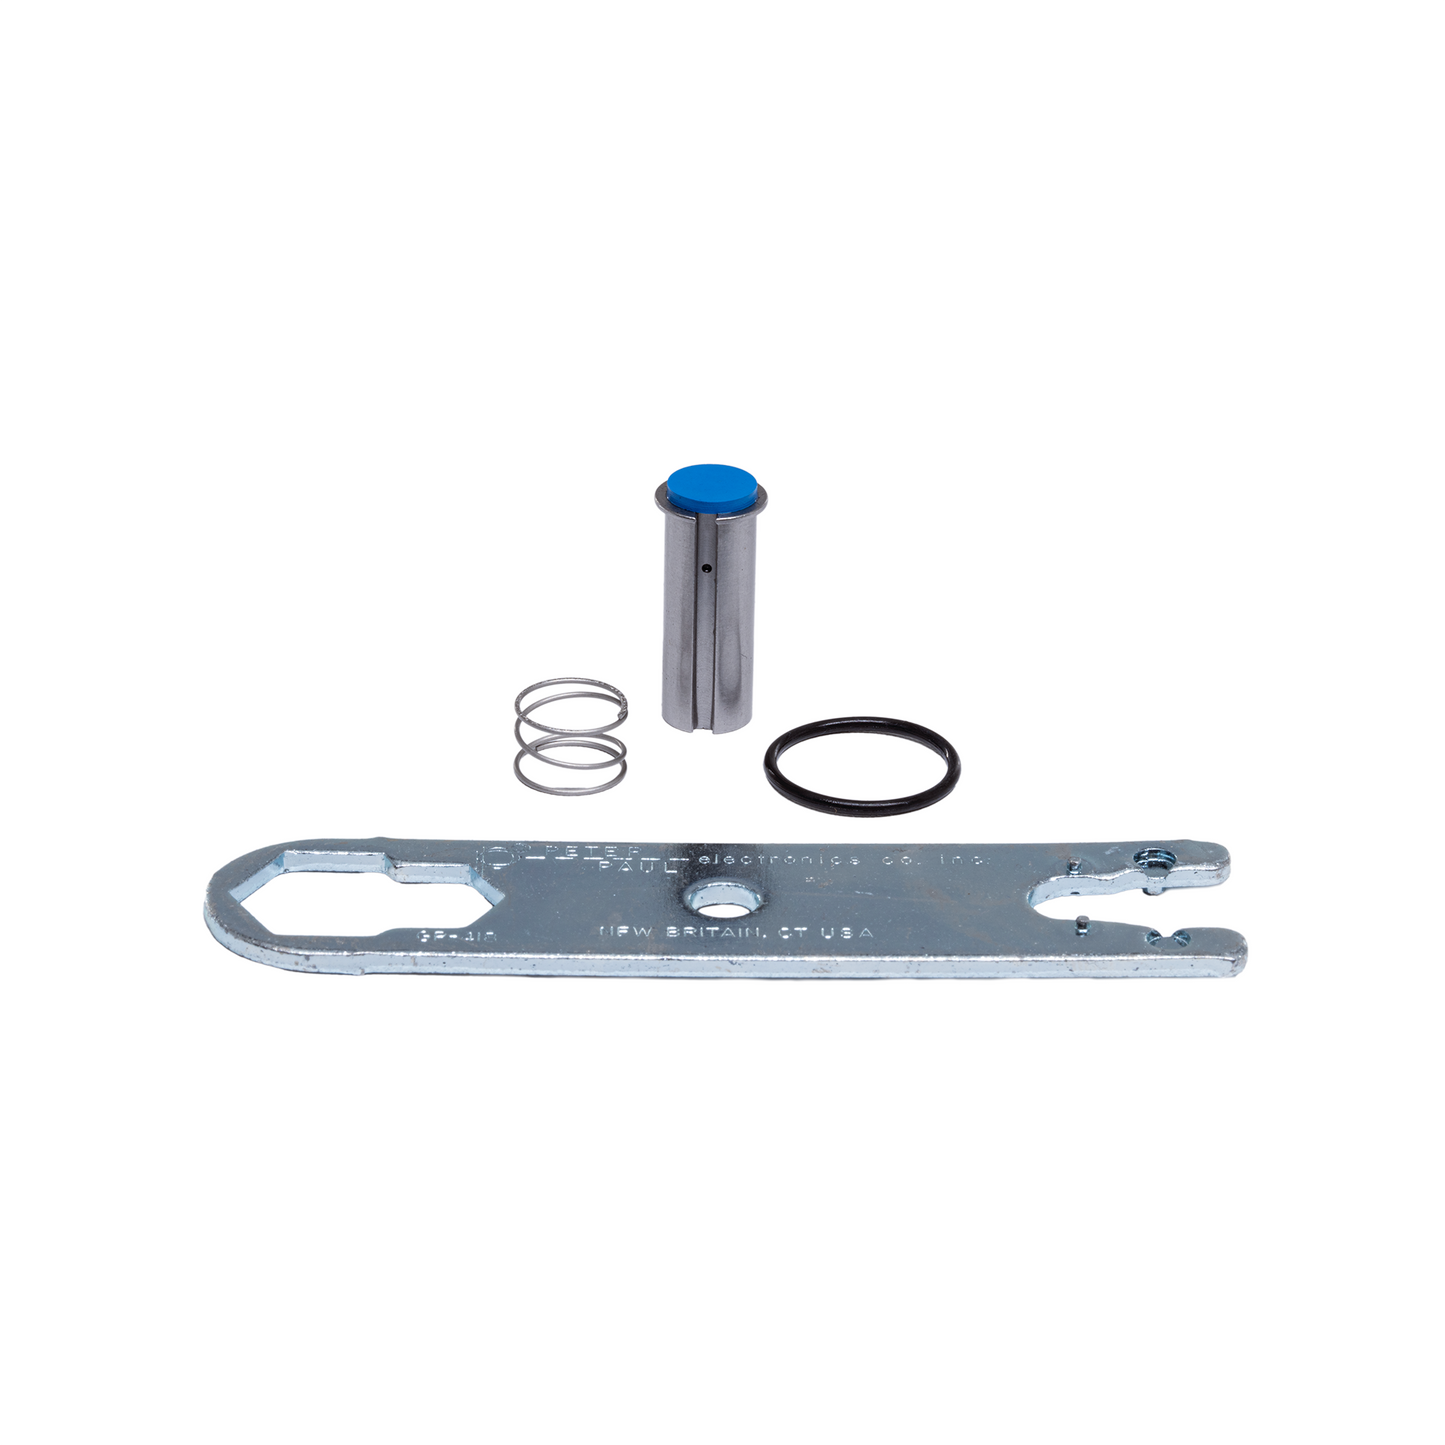 .310 High Pressure Alcohol Fuel Solenoid Rebuild Kit - Piston / Spring / O-Ring / Solenoid Wrench